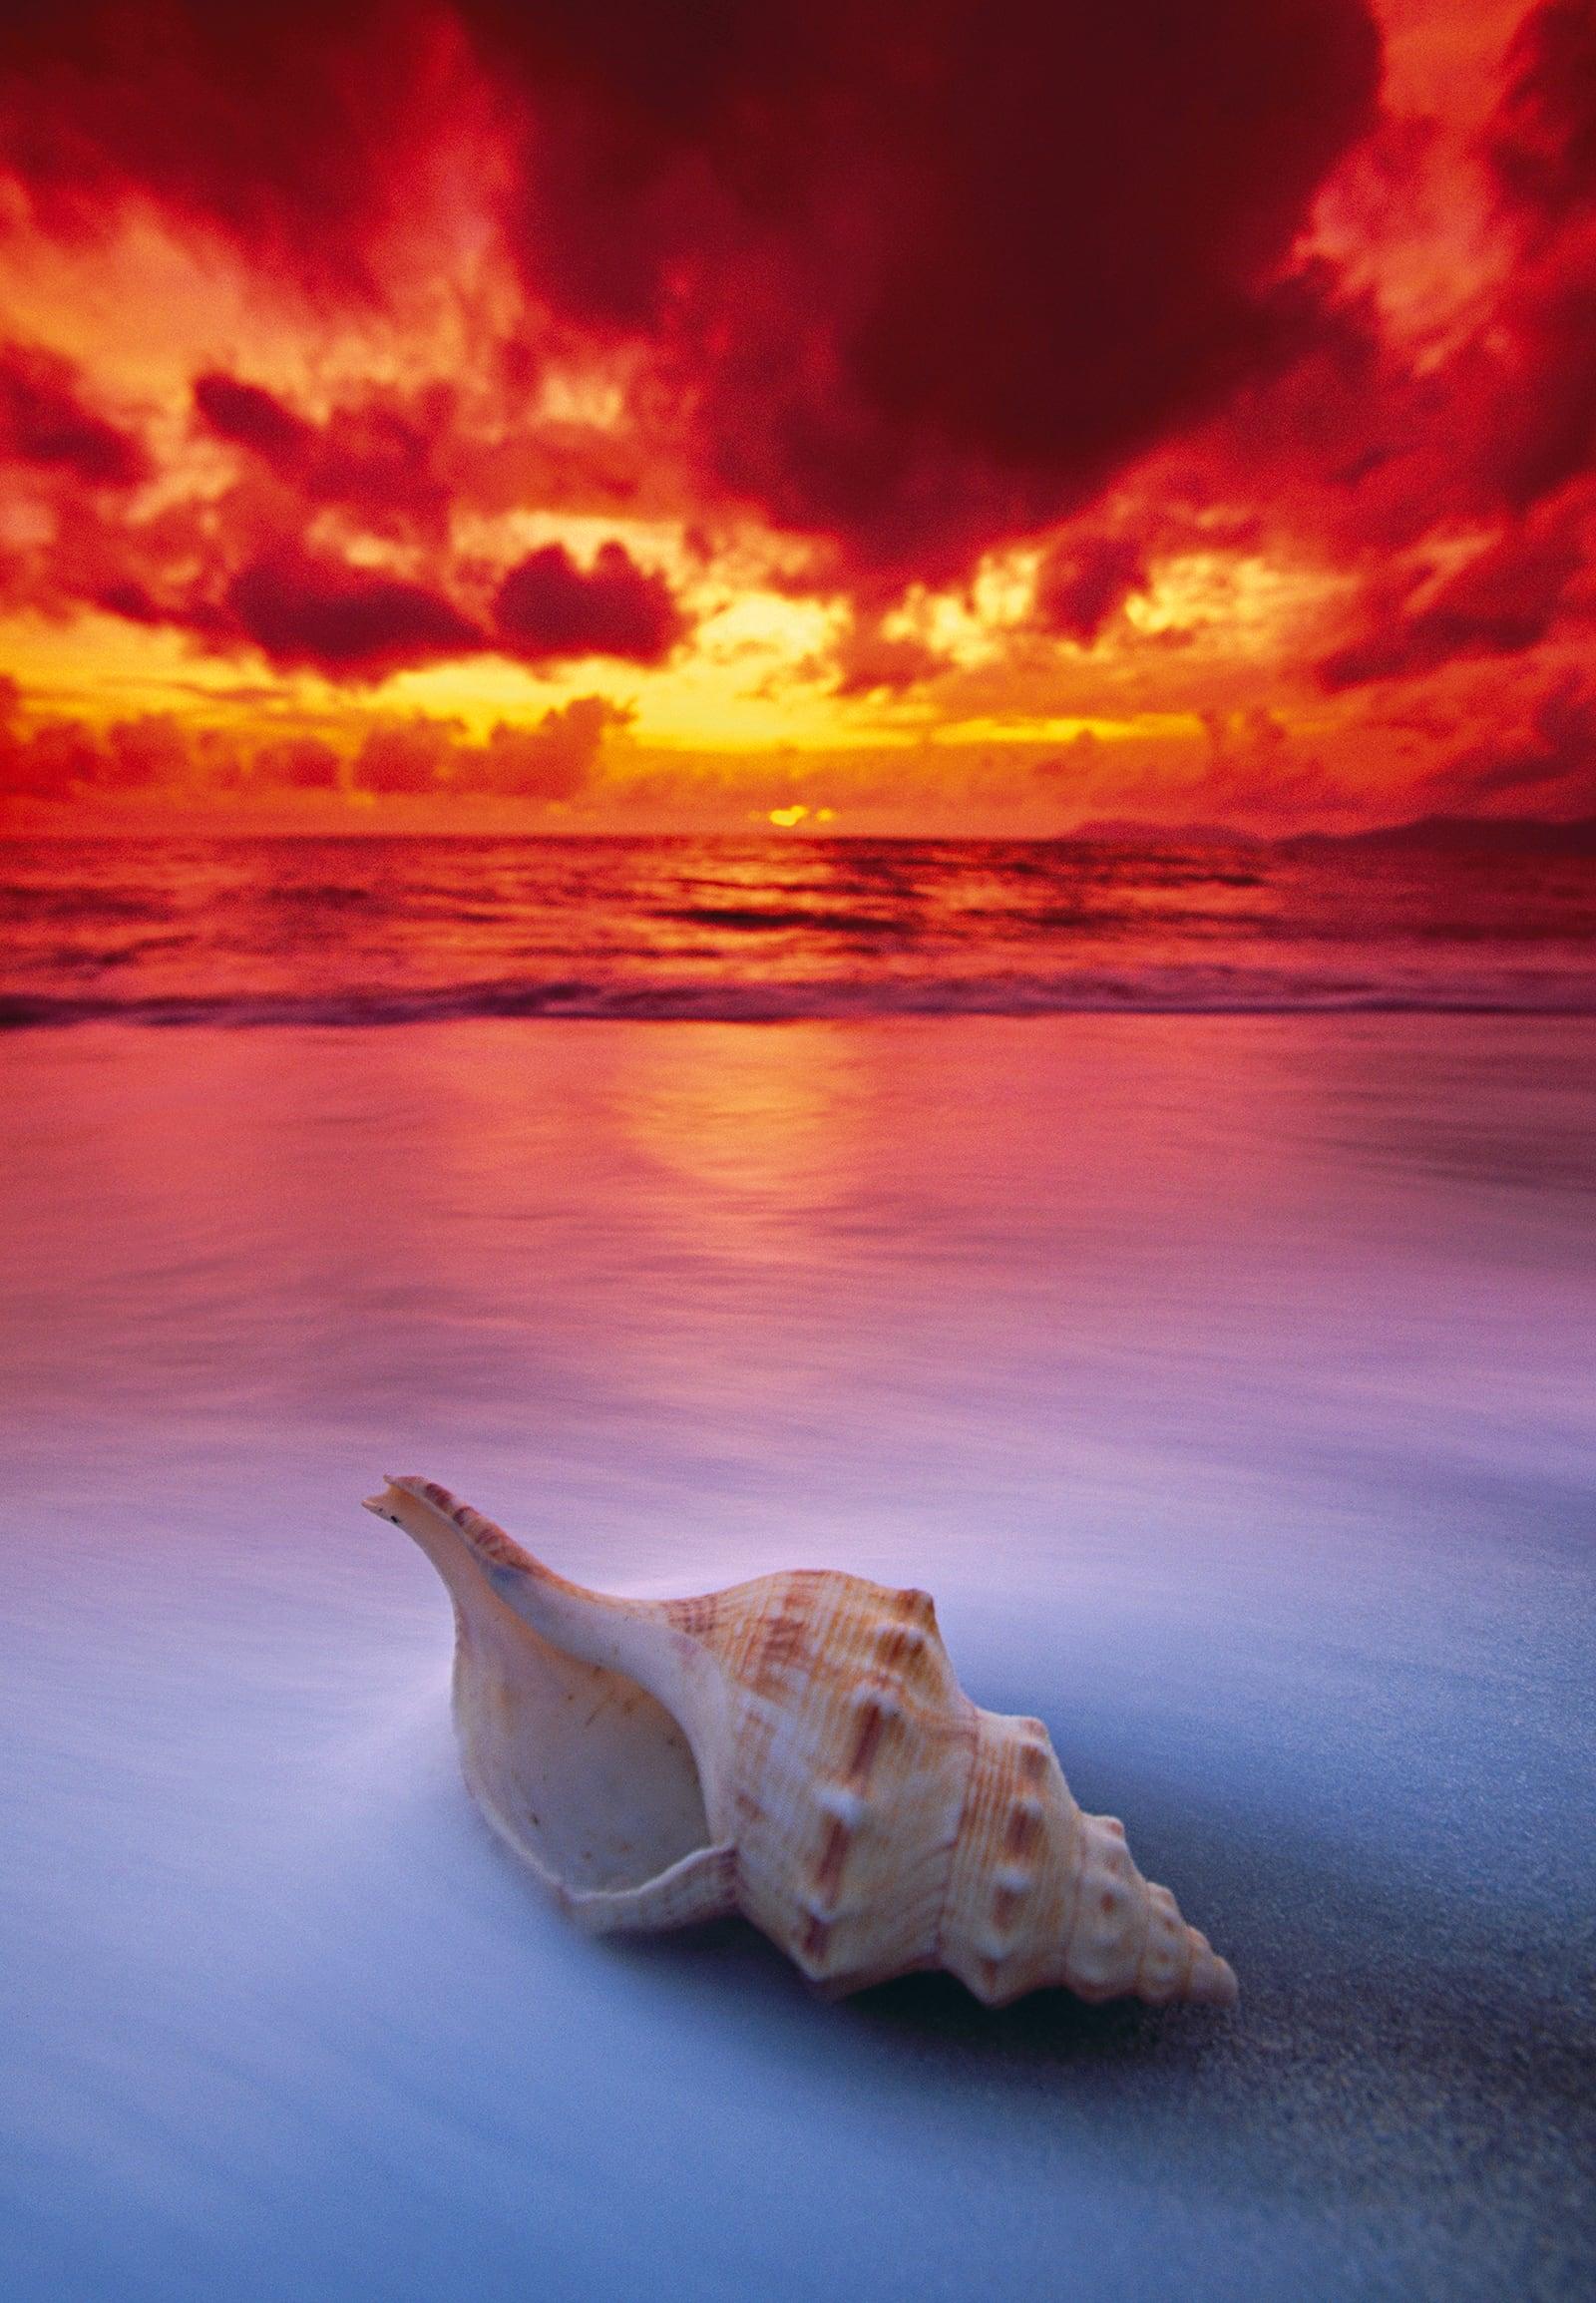 Conch shell on Holloways Beach, Australia during under the red cloudy sky at sunset